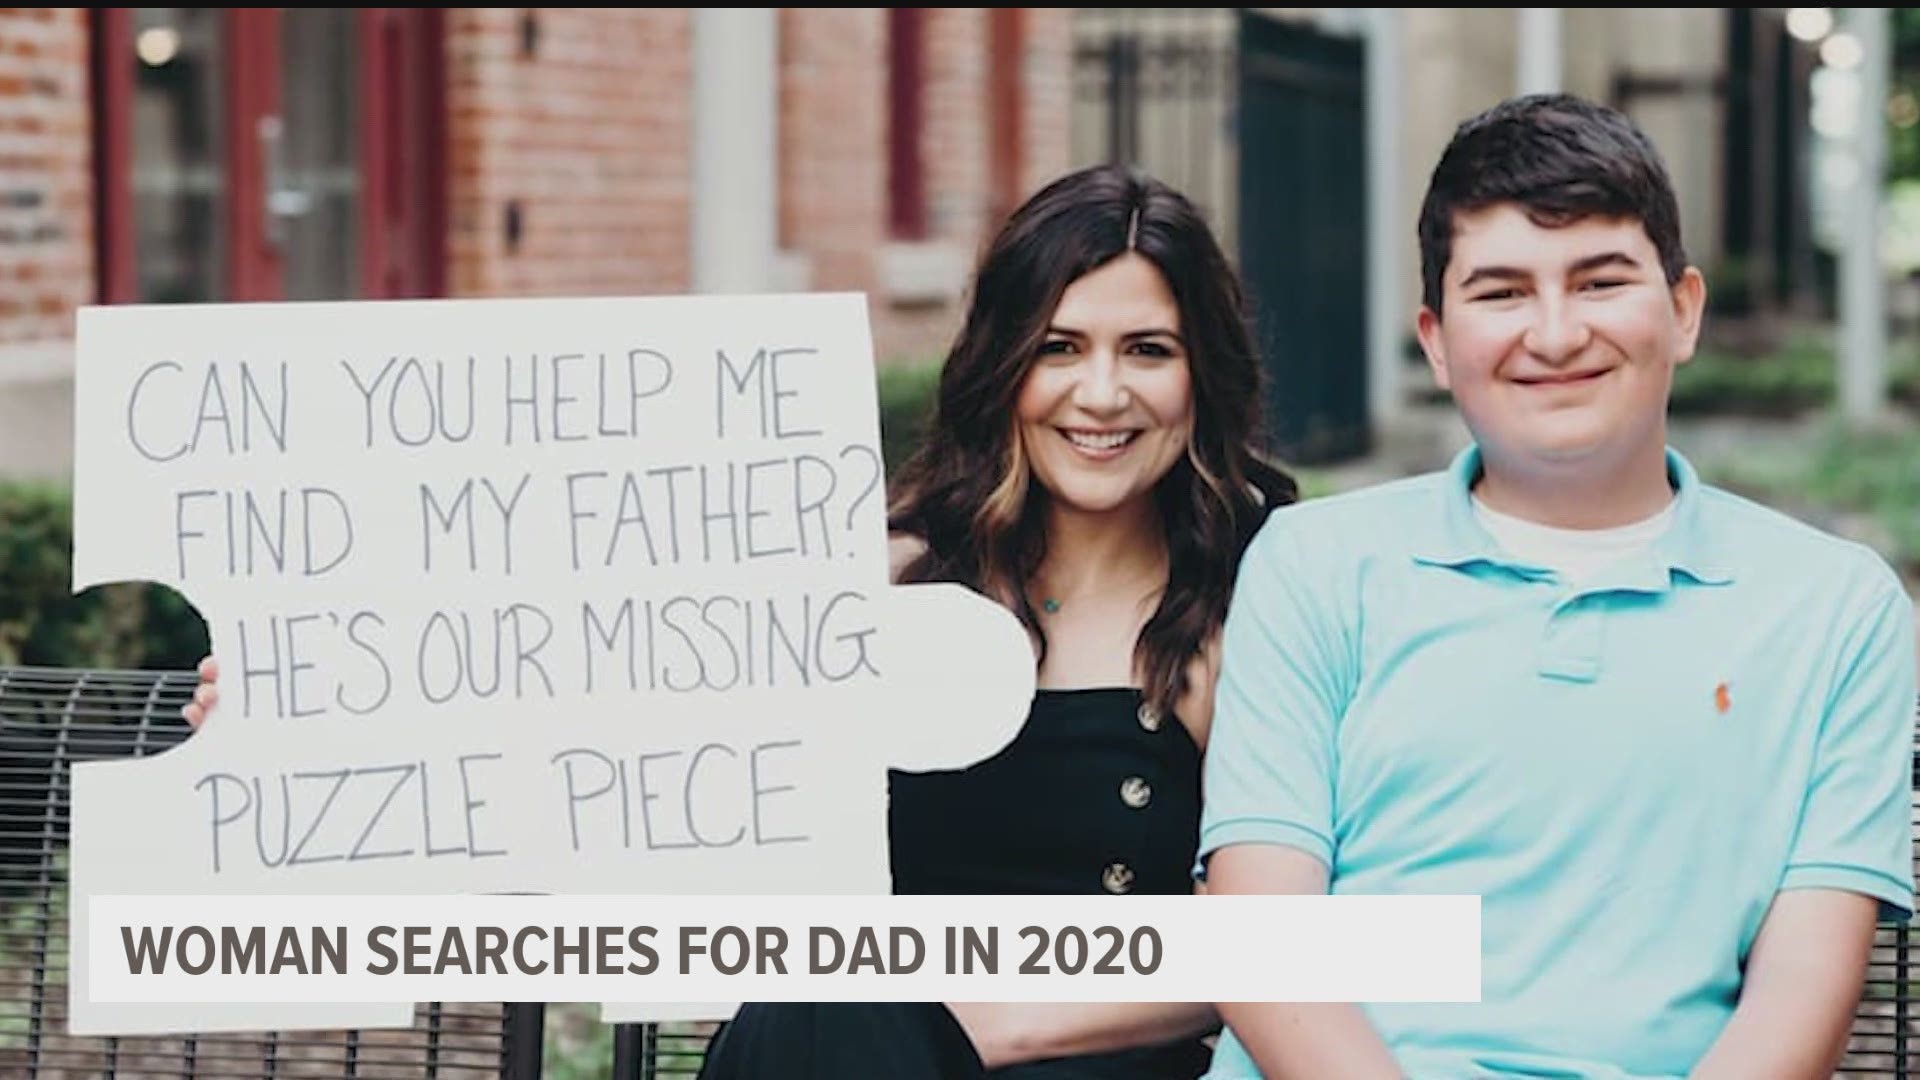 Sandra Rohrer's mom was murdered by an ex-boyfriend before she could ask about her biological dad. The author spent 2020 searching for him— and succeeded.